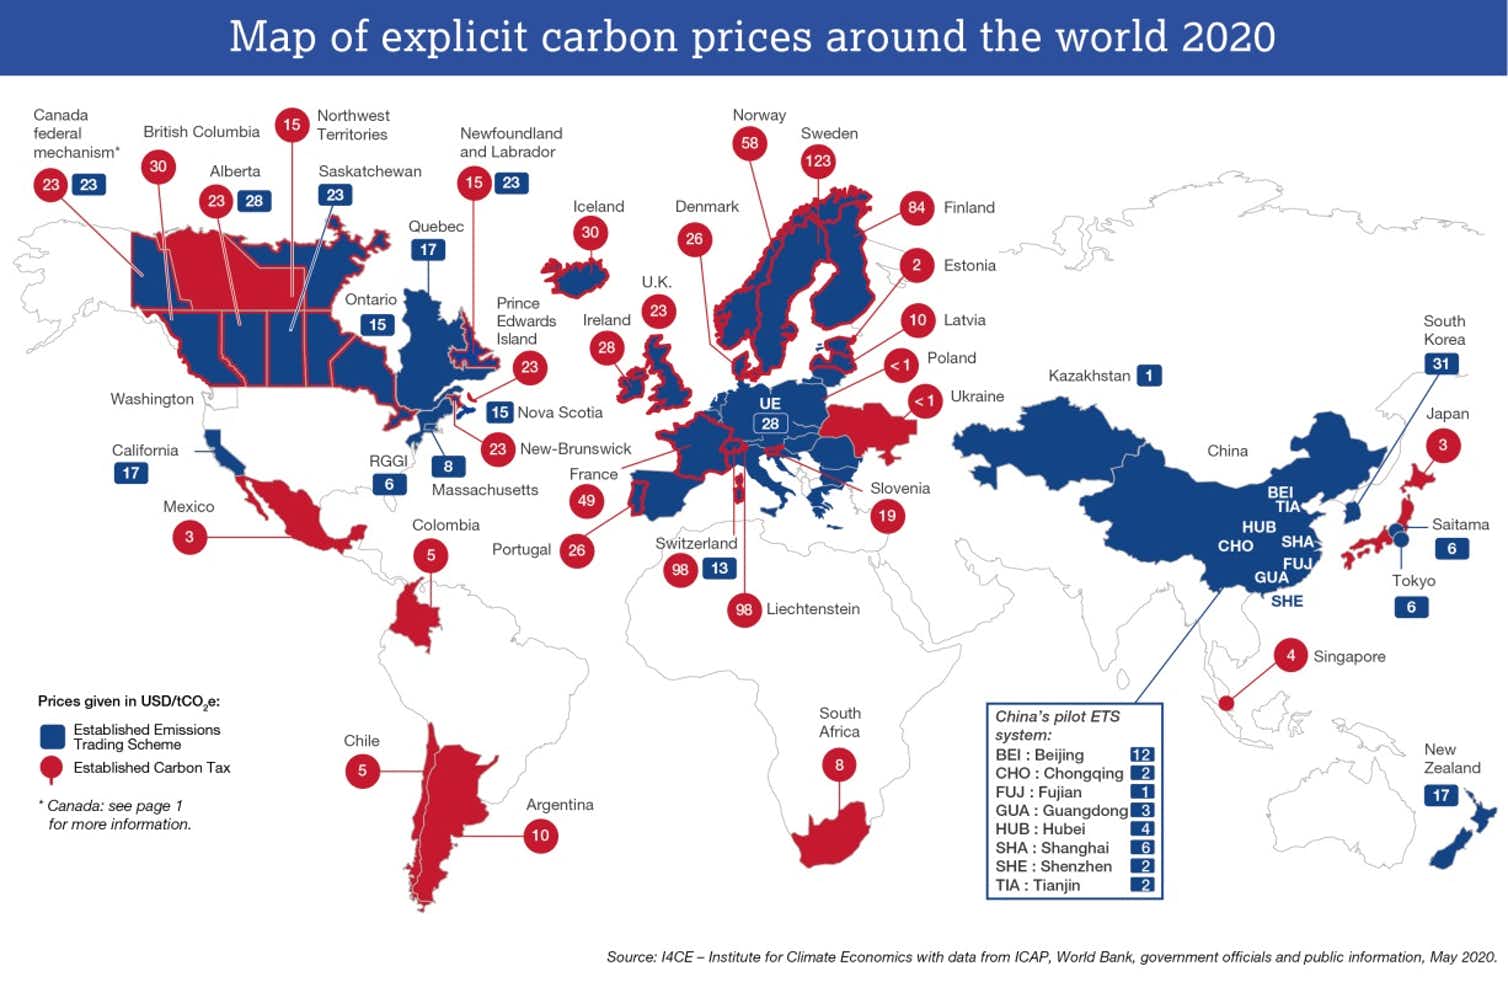 A red and blue colored world map of explicit carbon prices